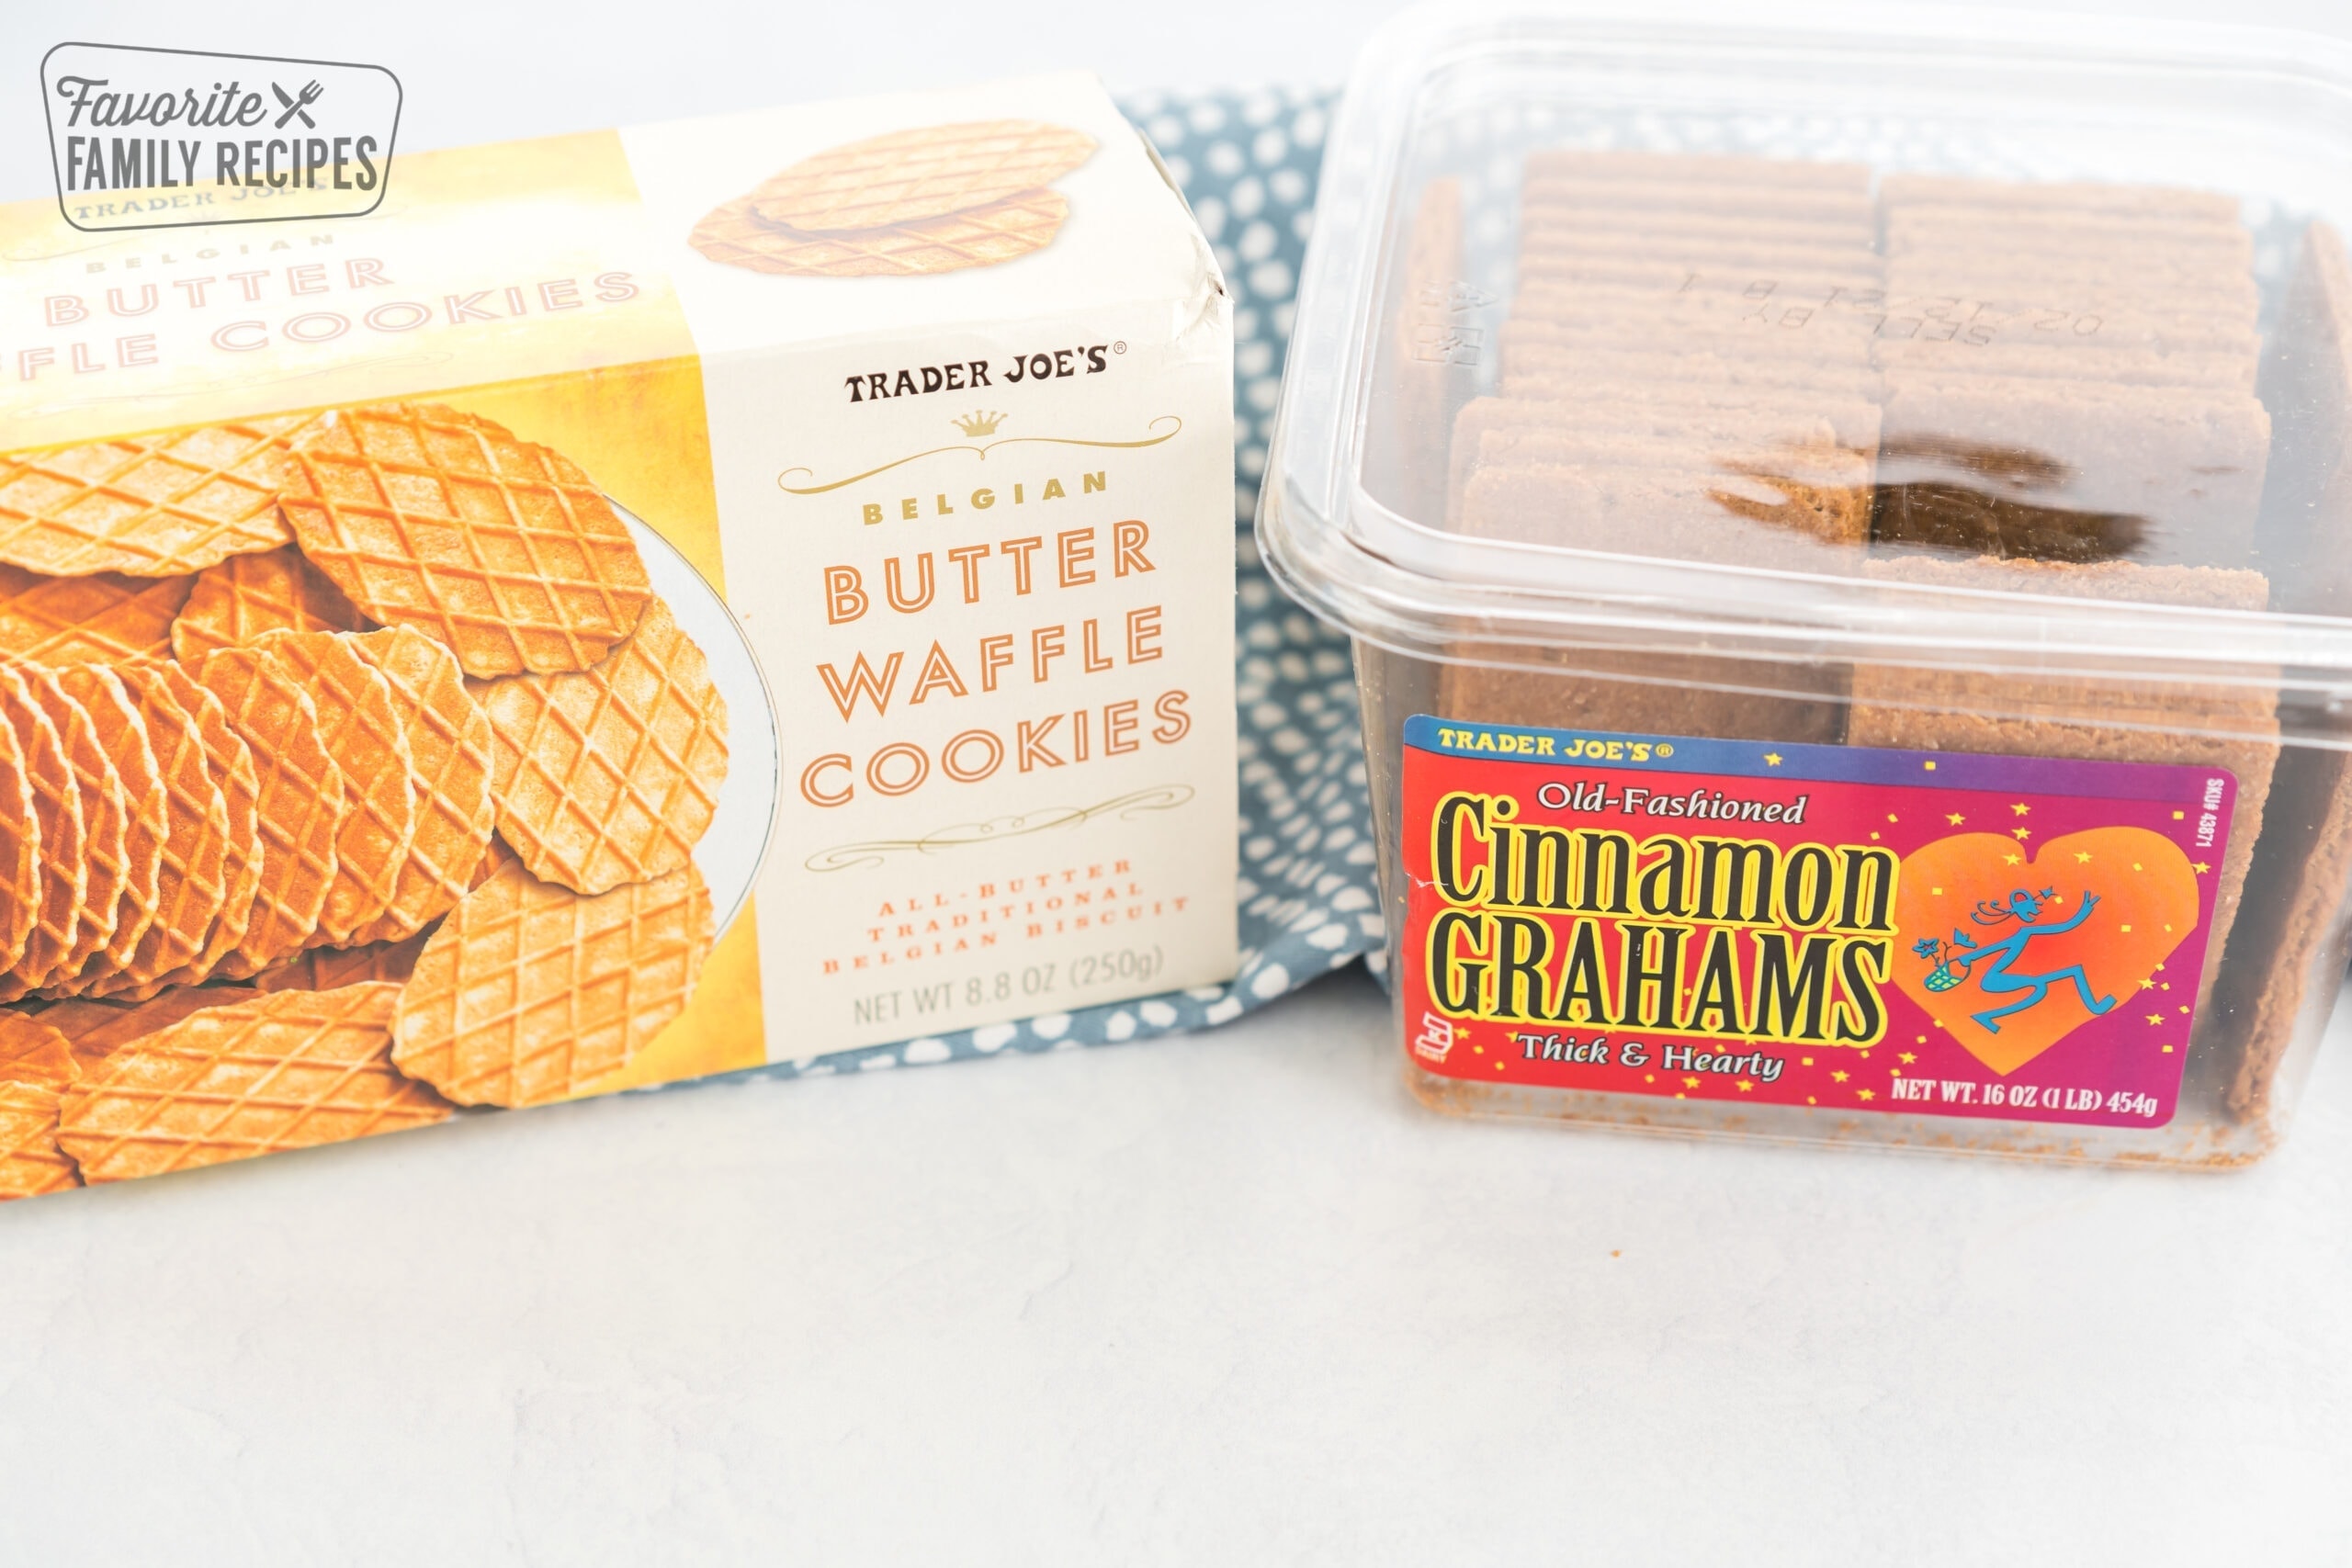 Butter waffle cookies and graham crackers from trader joes